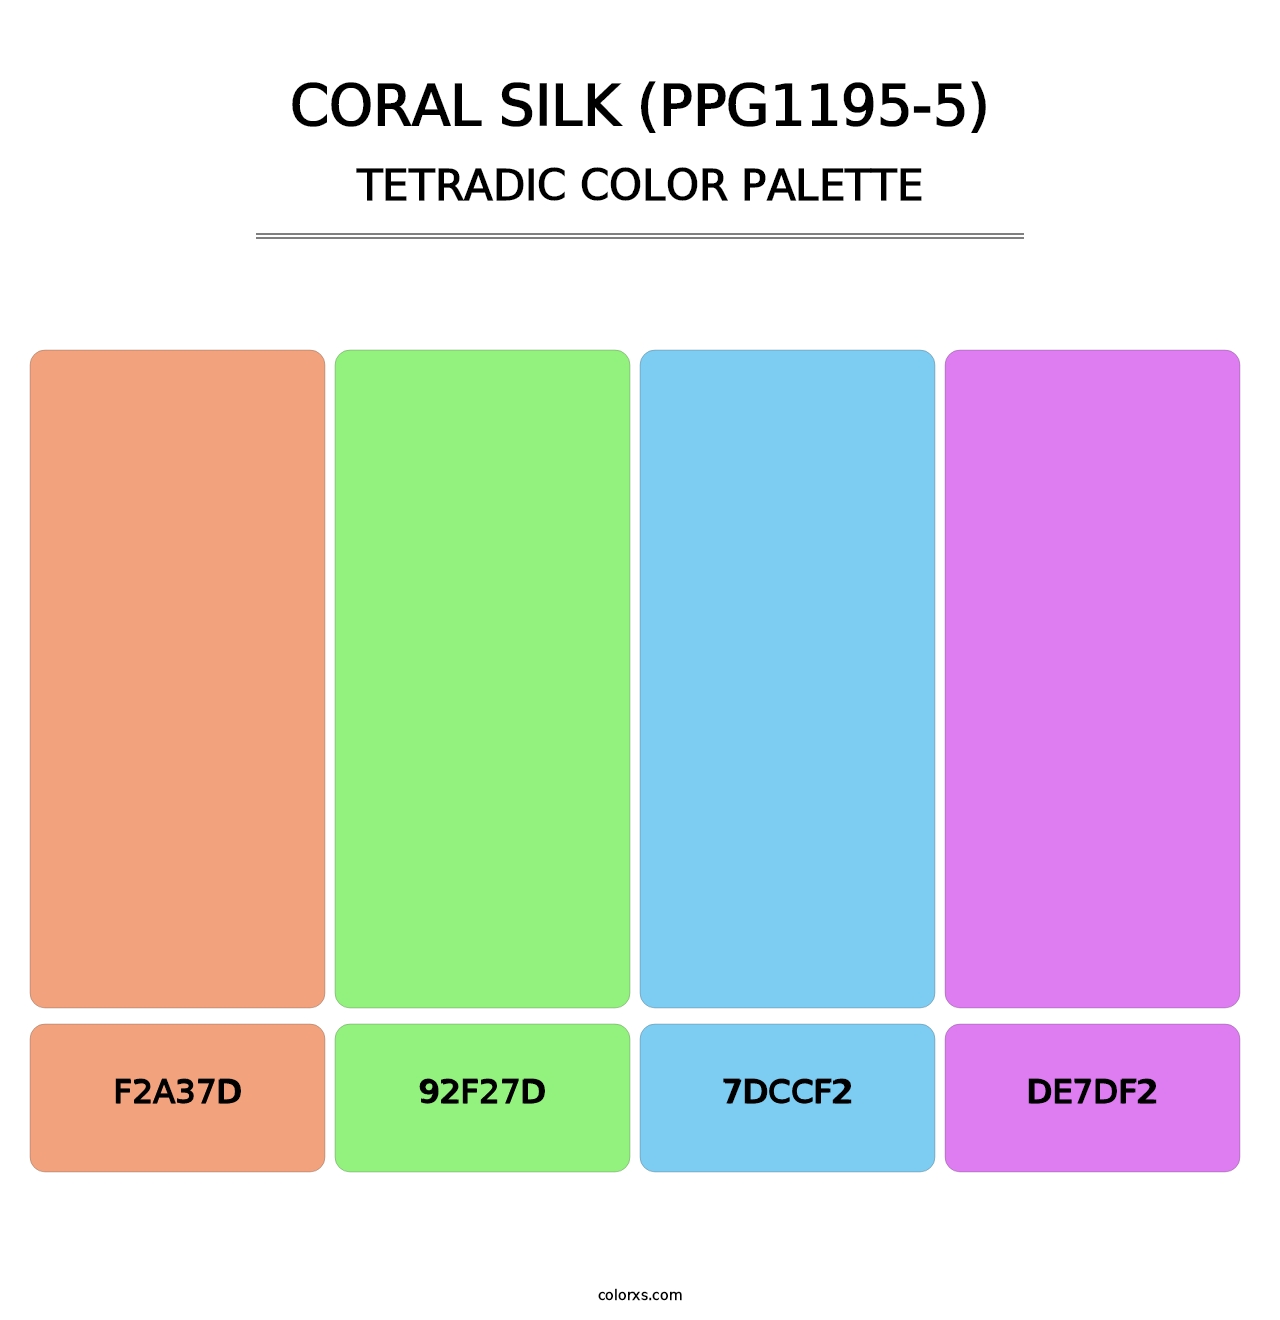 Coral Silk (PPG1195-5) - Tetradic Color Palette